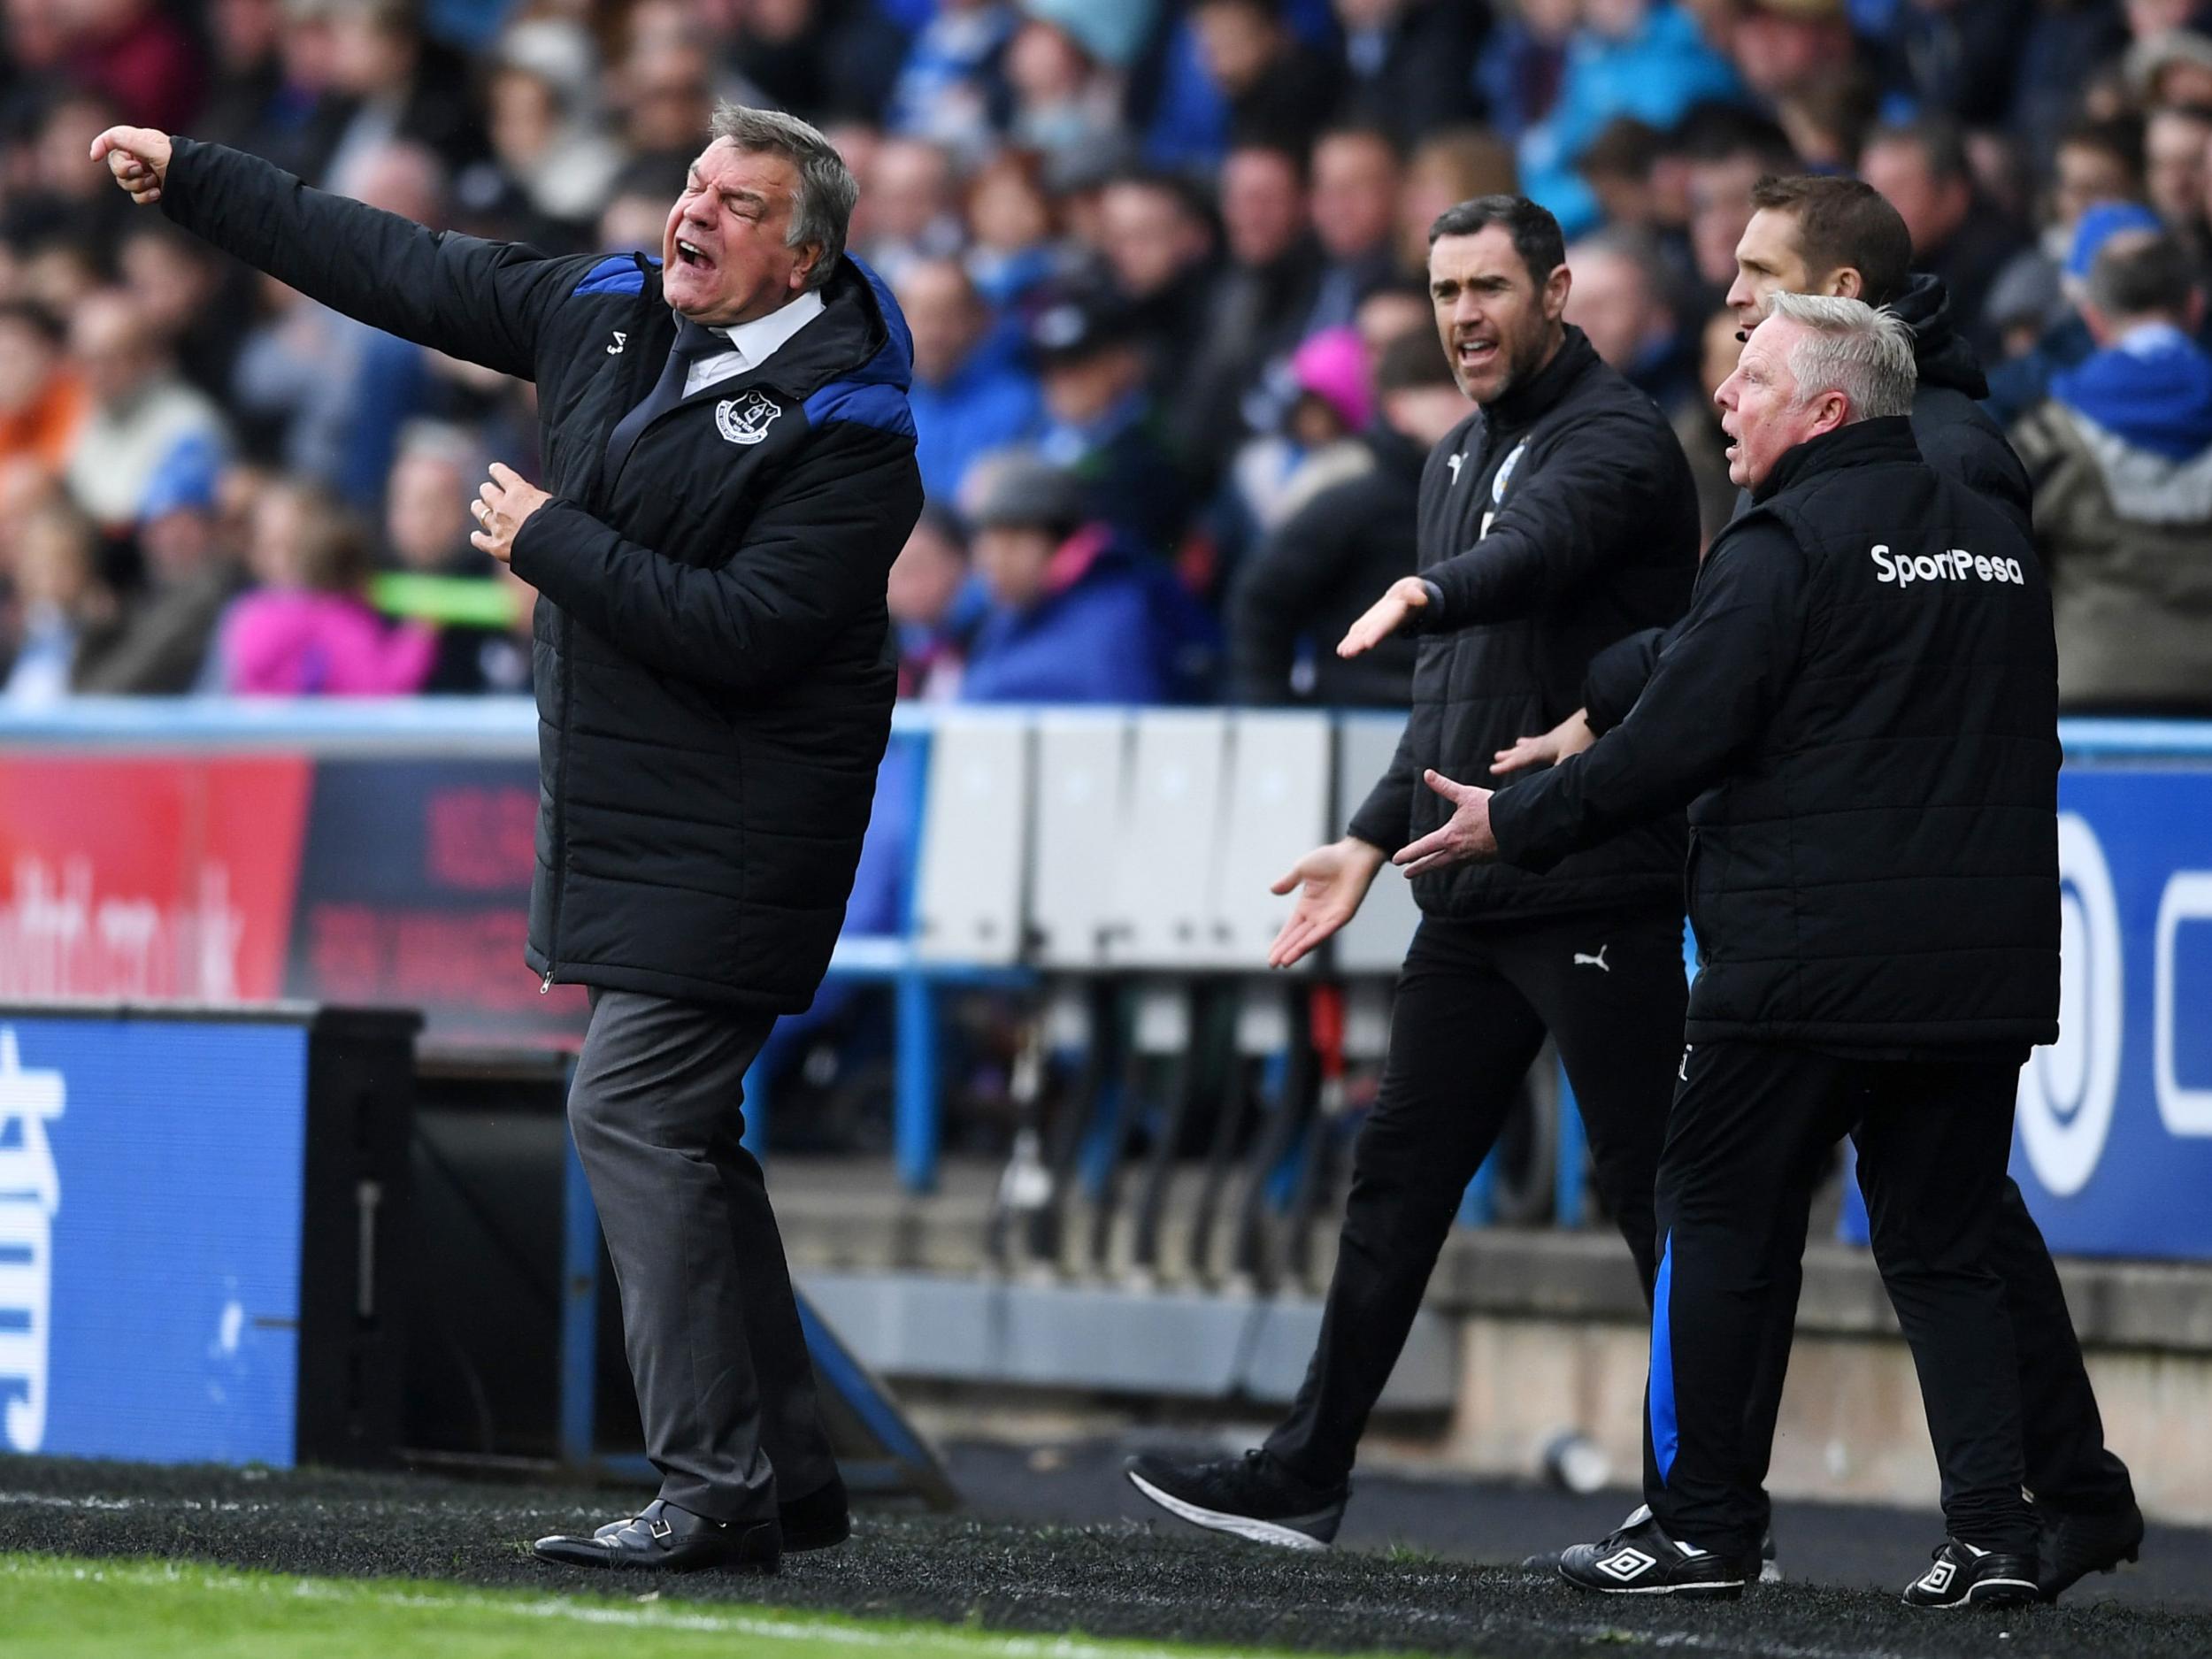 Allardyce face more protests from fans at Huddersfield